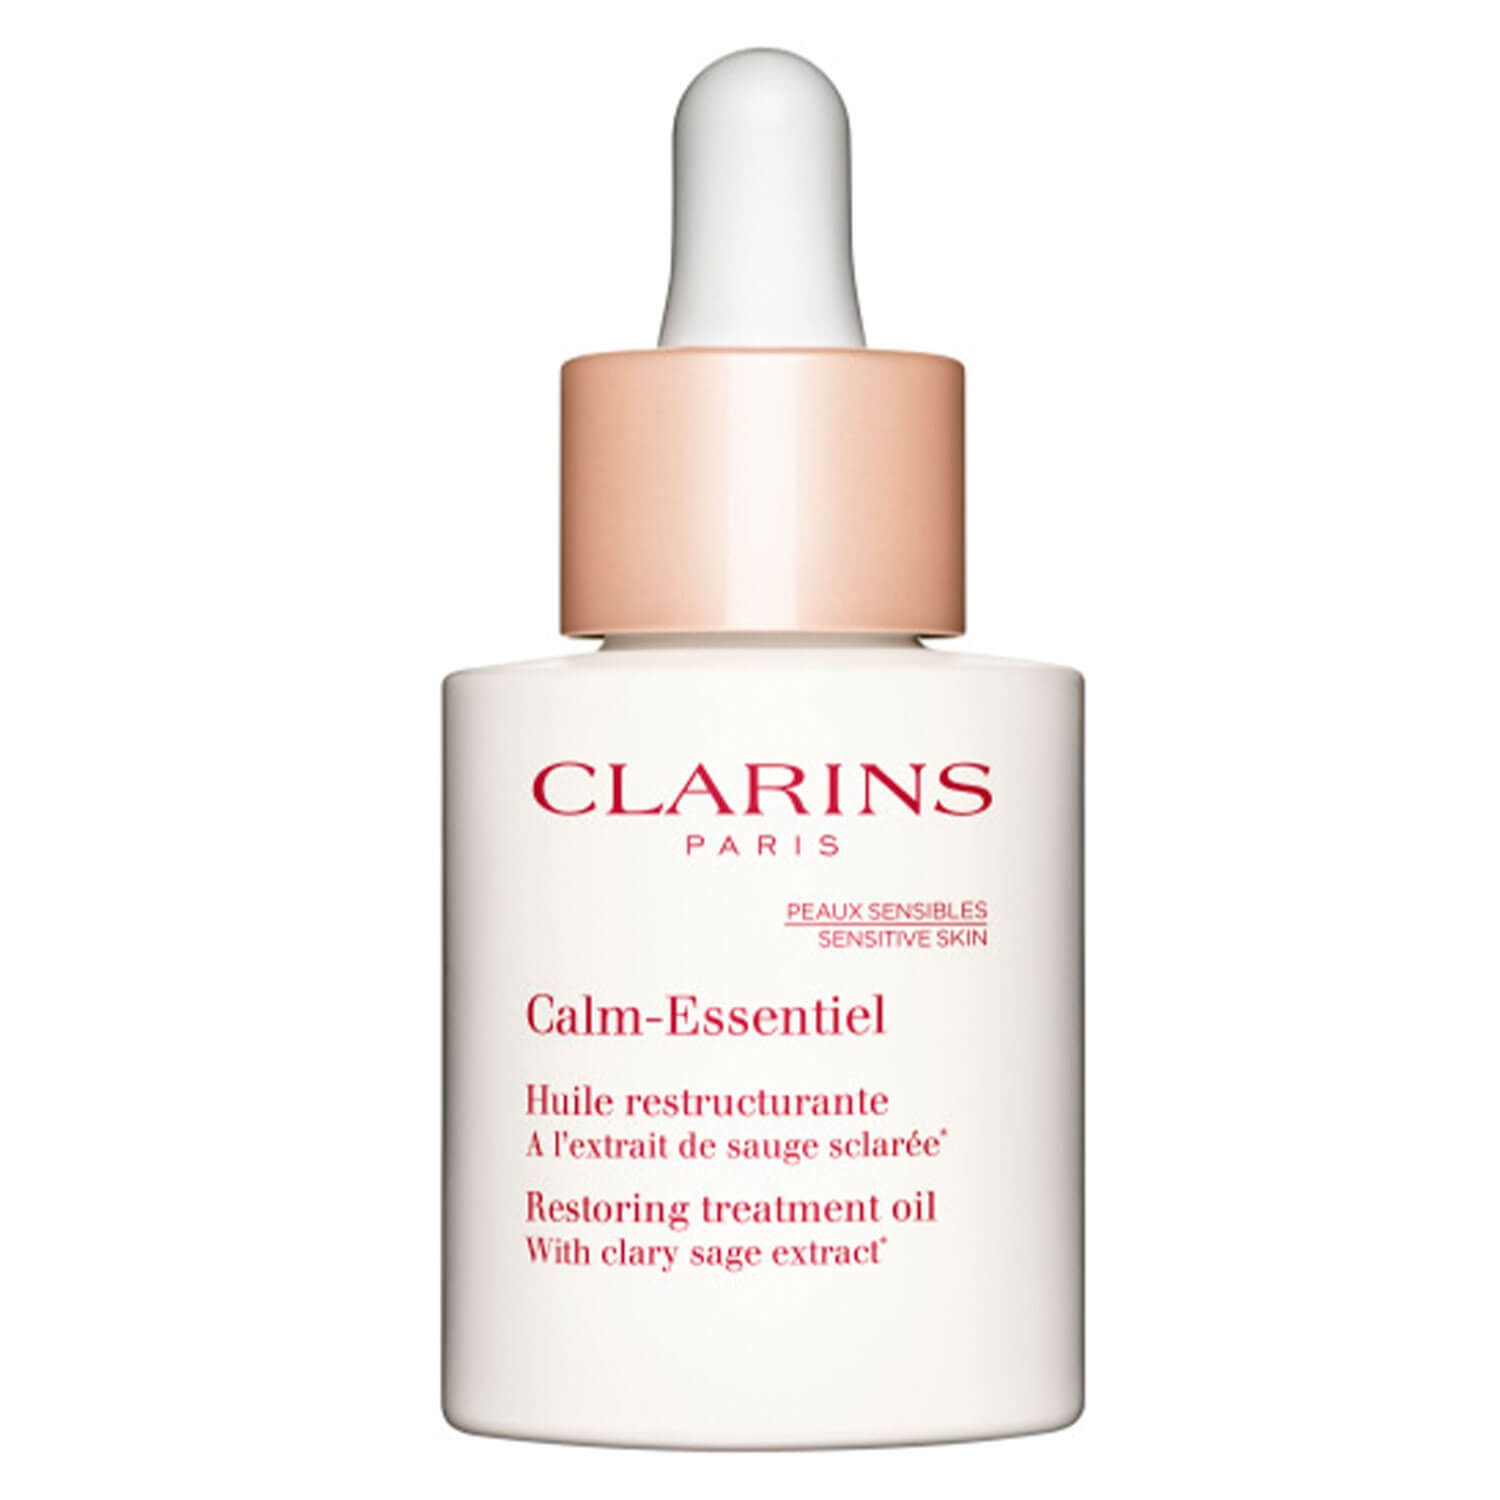 Product image from Clarins Skin - Huile Restructurante Calm-Essentiel